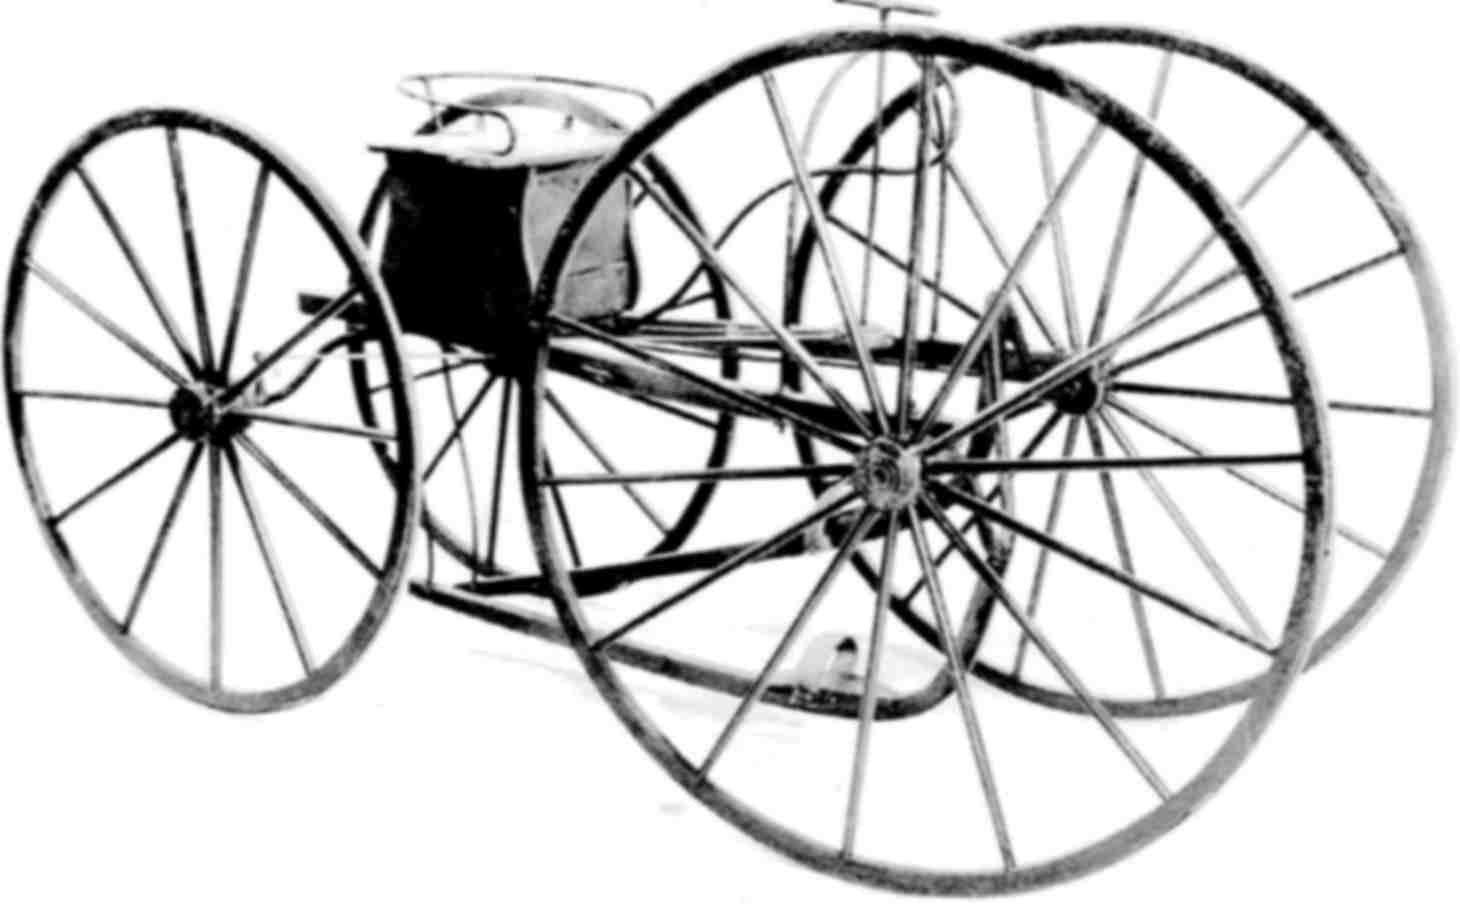 Sawyer`s style of steering rotates the rear axle on a central pivot